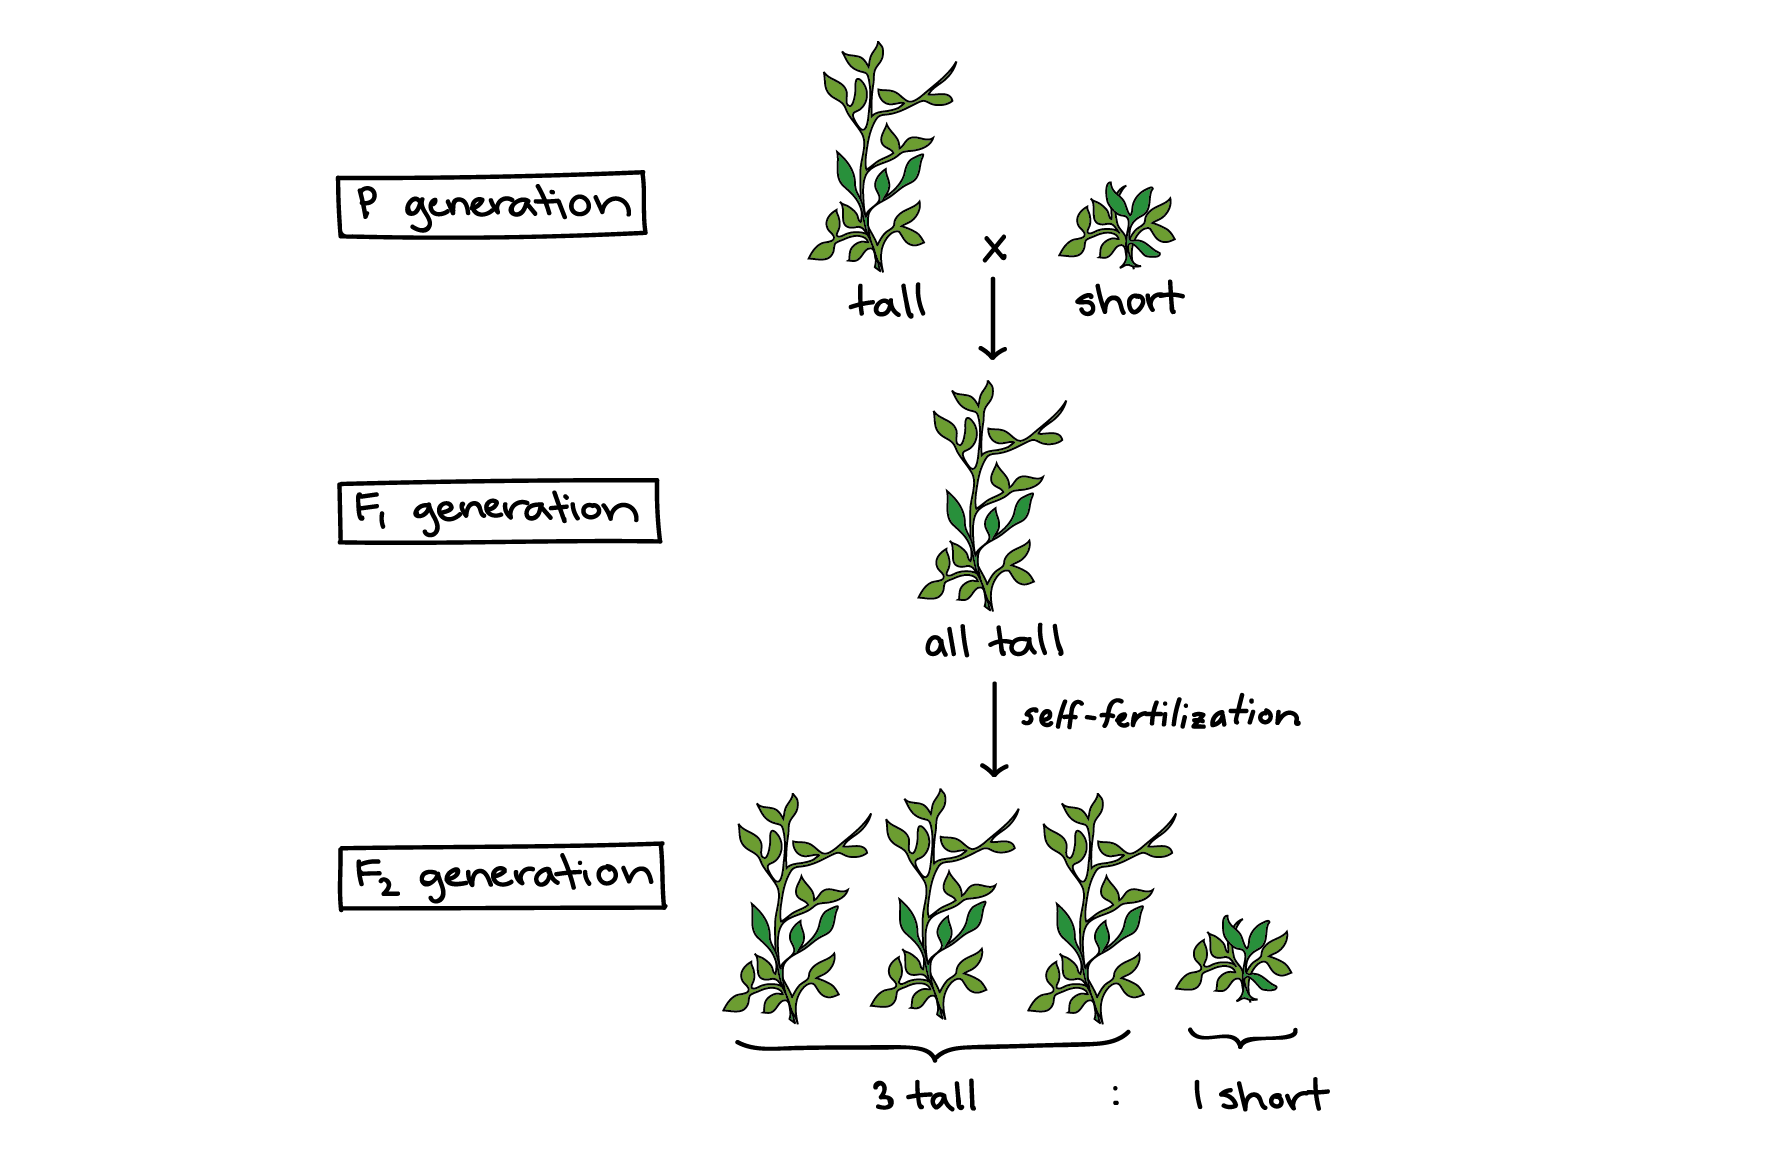 Diagram of a cross between a tall plant and a short plant, labeling the P, F1, and F2 generations.